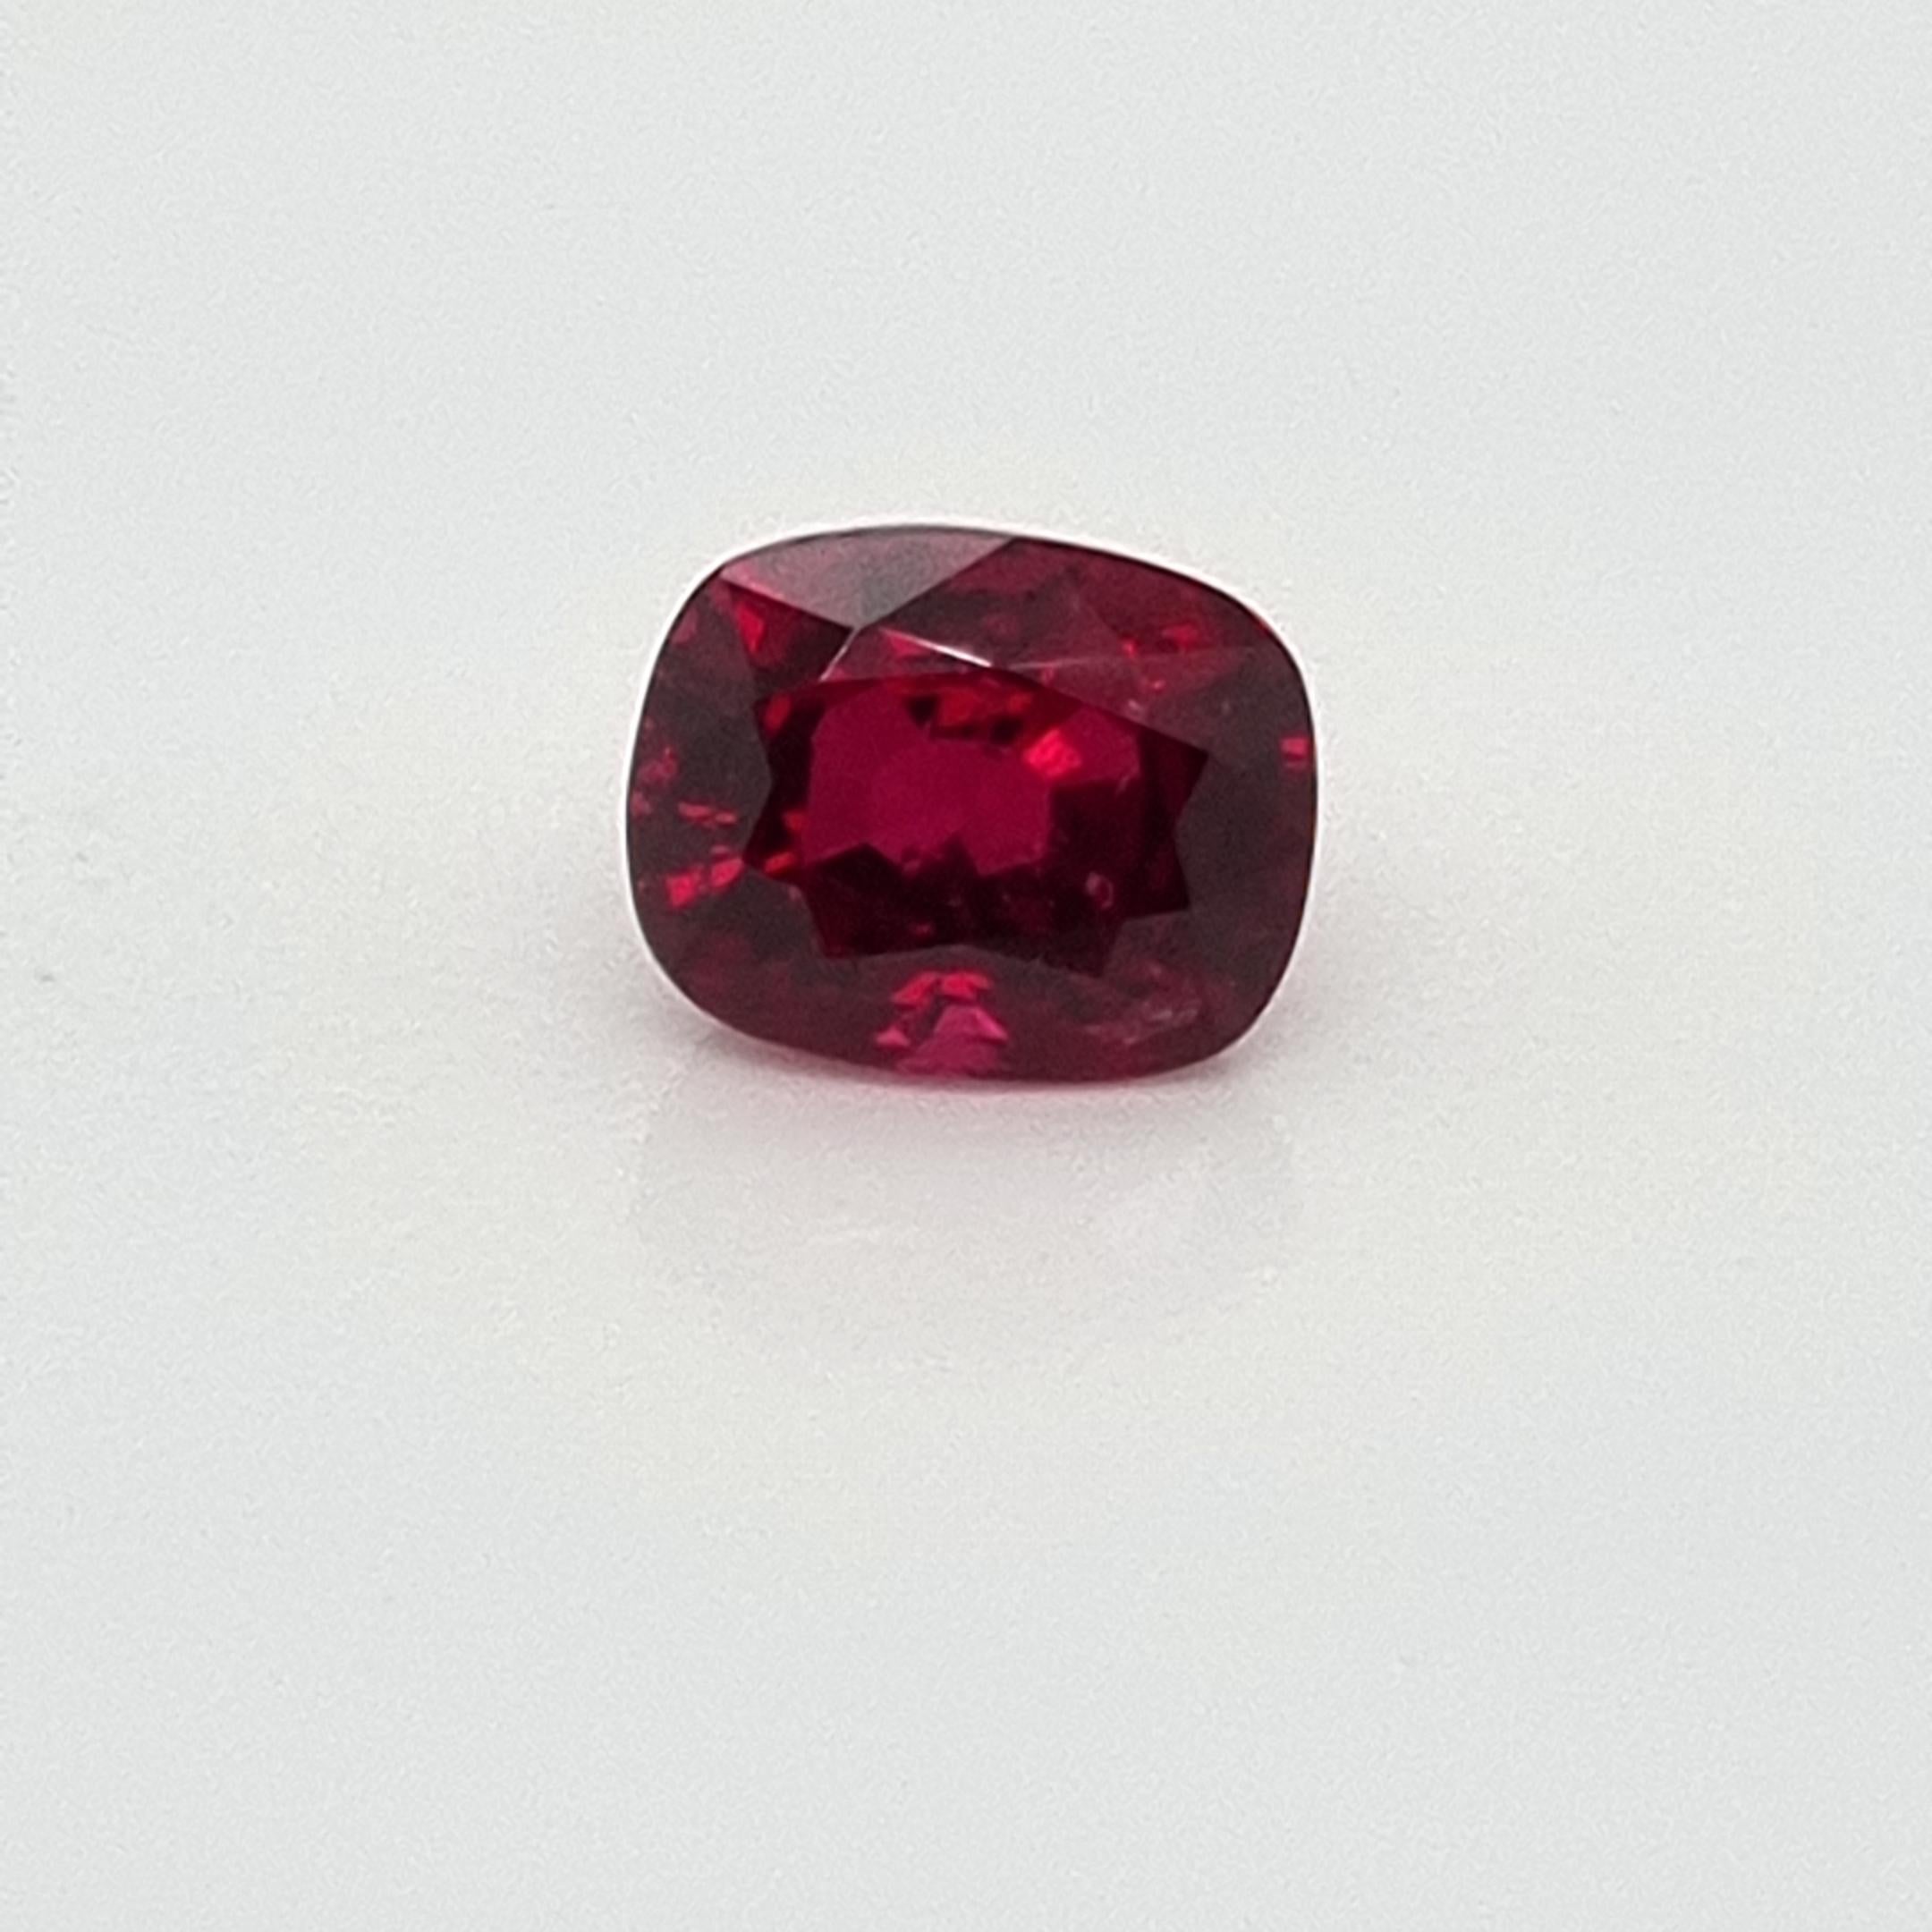 This Beautiful unheated Burmese 'Pigeon Blood' red ruby is the perfect stone for anyone looking to grow their collection of fine and unique gems. 

Weighing 2 carats, this stone can appeal to a wide clientele. It exhibits a deep, even, and rich red